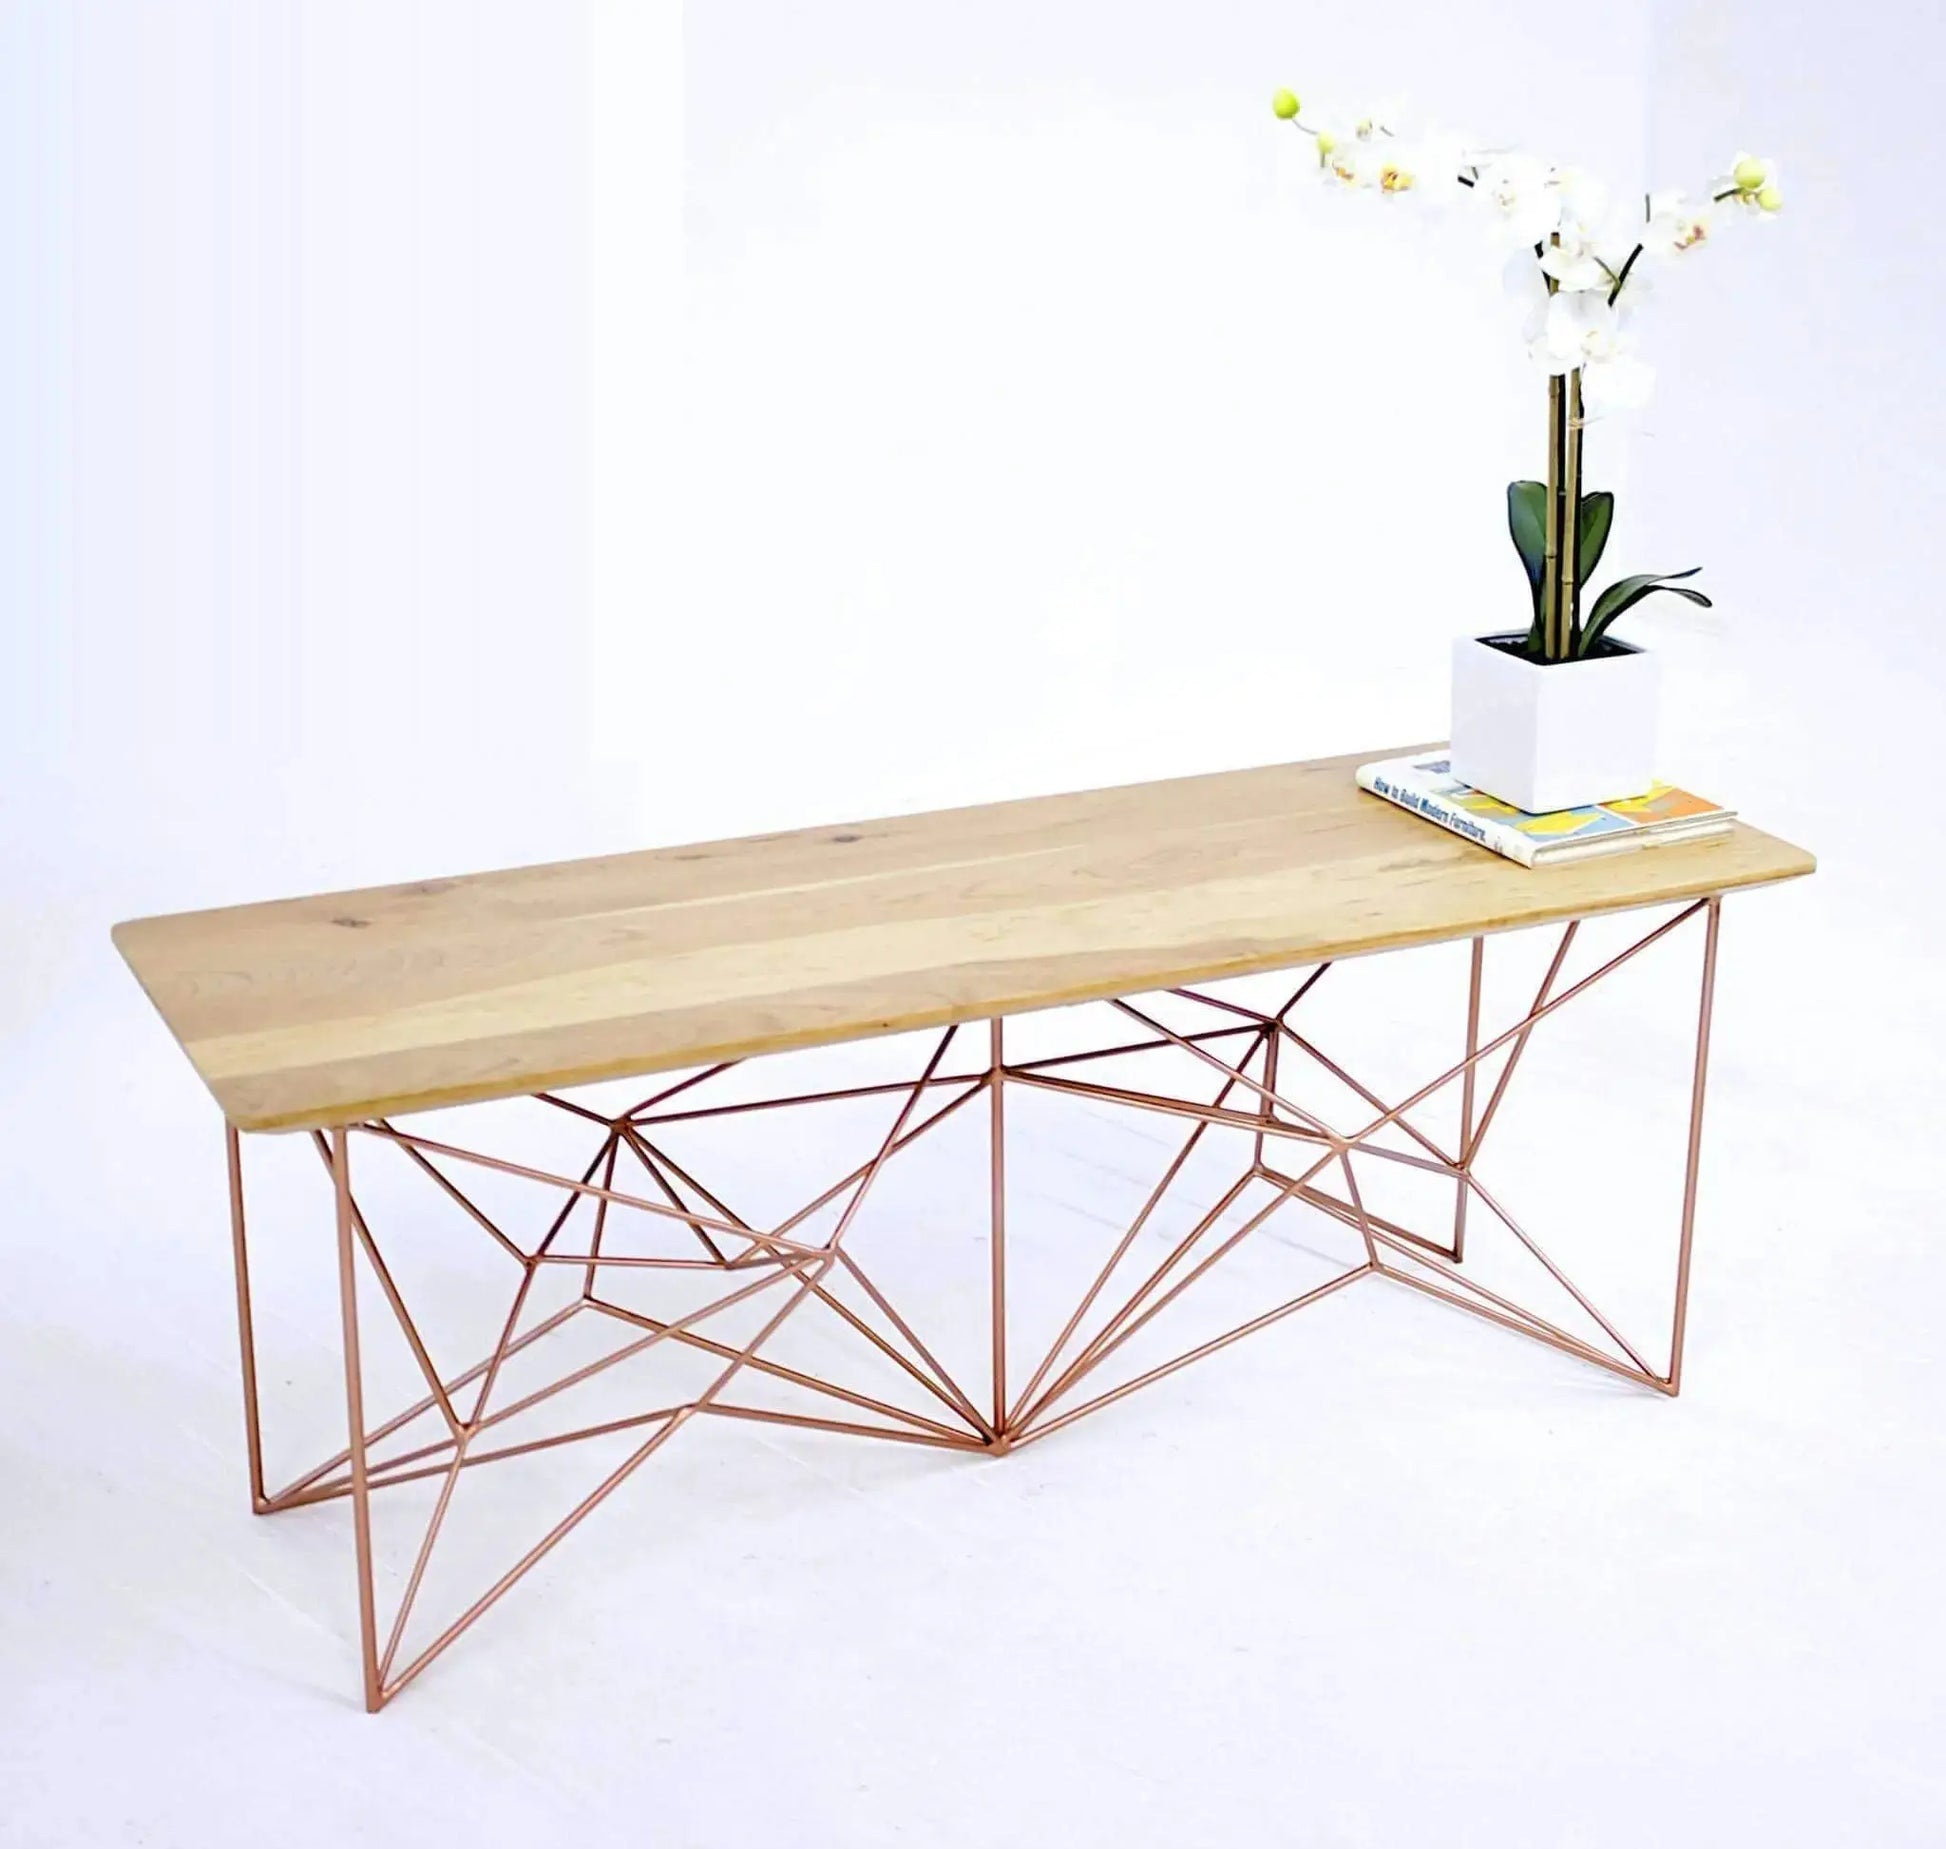 ​The Yoshi: Modern bench for Entryway - Moderncre8ve-Geometric Steel base